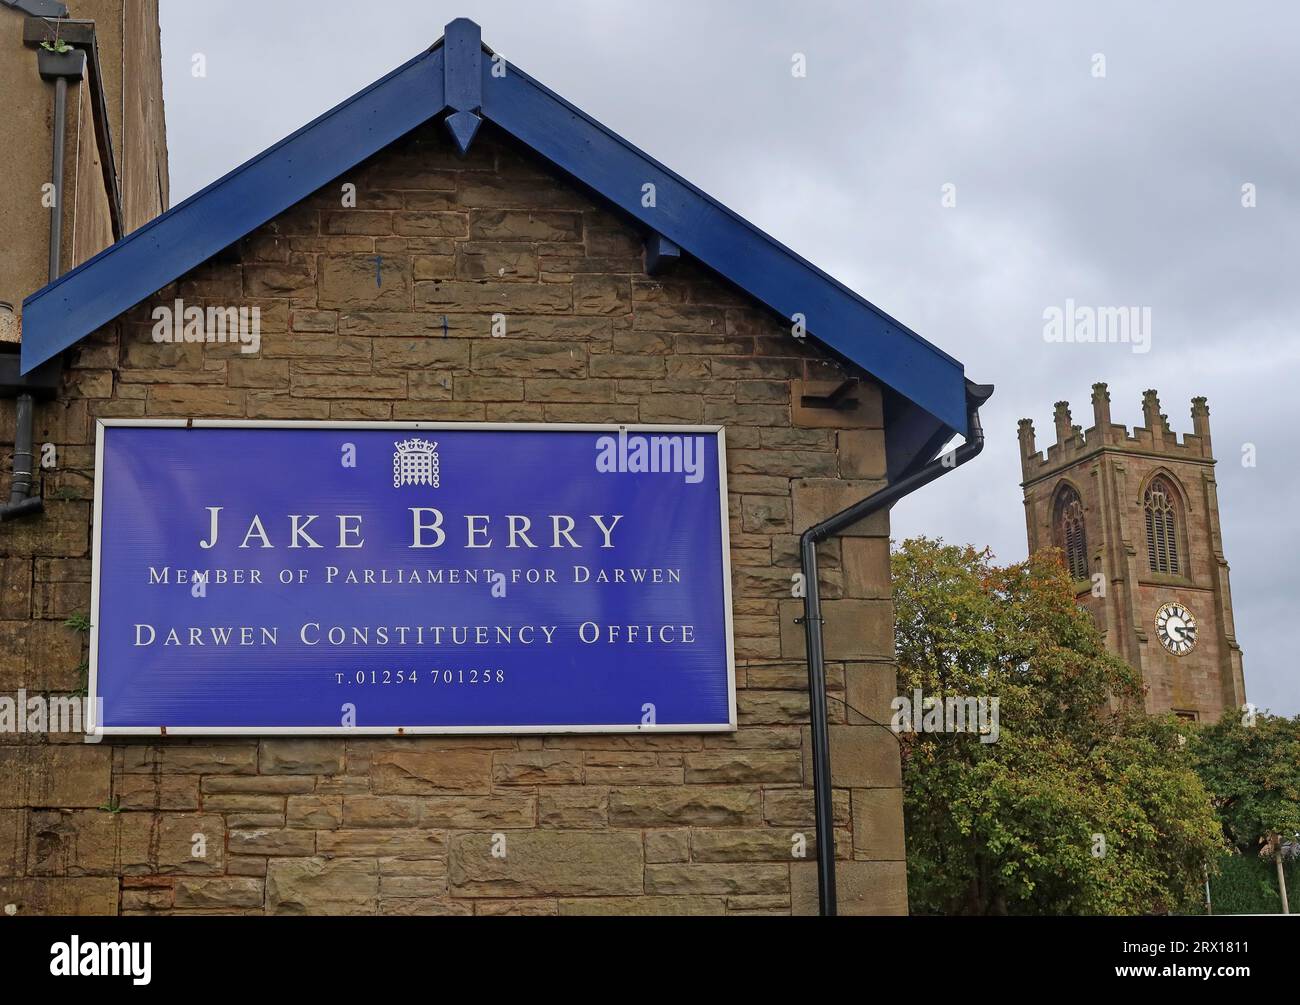 Parliament constituency office of Jake Berry, Conservative MP member of parliament for Darwen, Lancashire, England, UK, BB3 2RG Stock Photo